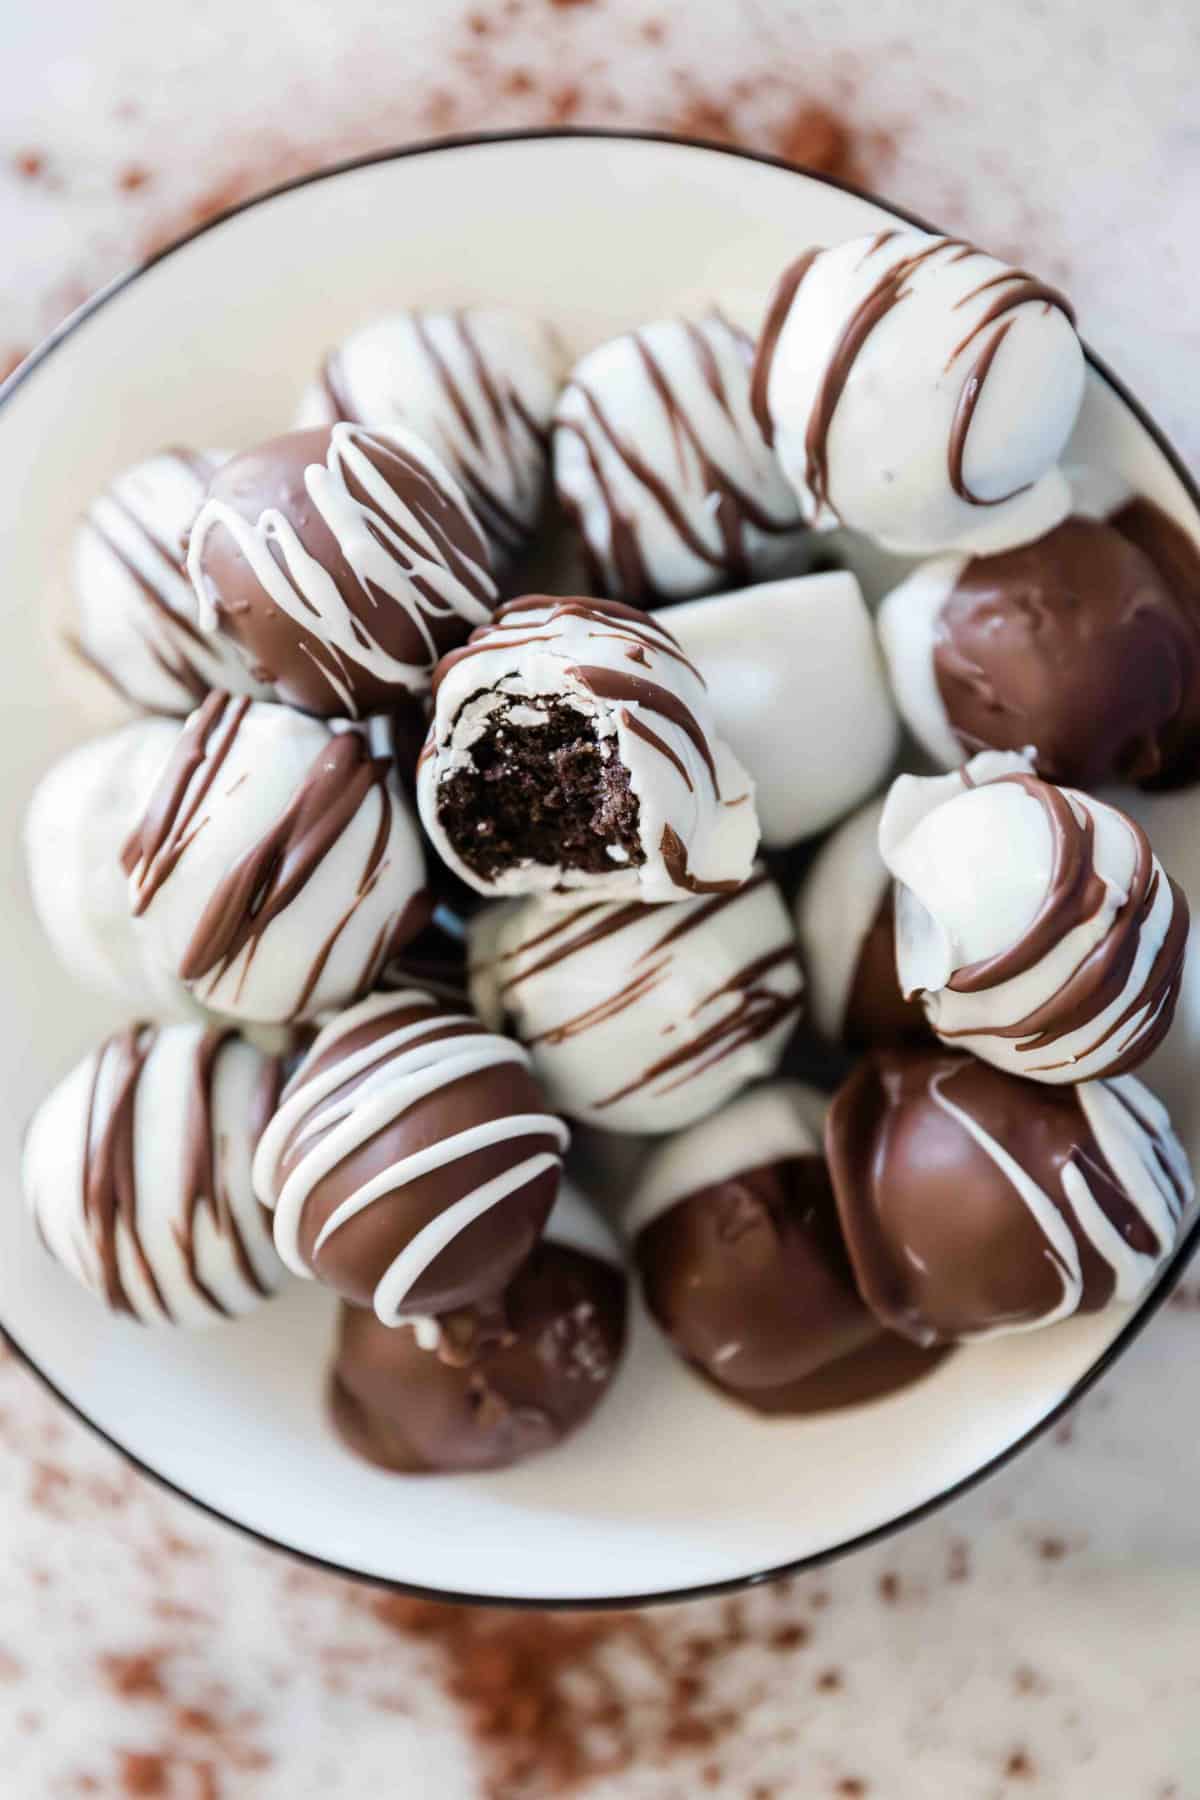 Oreo Truffles in a white rimmed bowl. There is one with a bite missing.